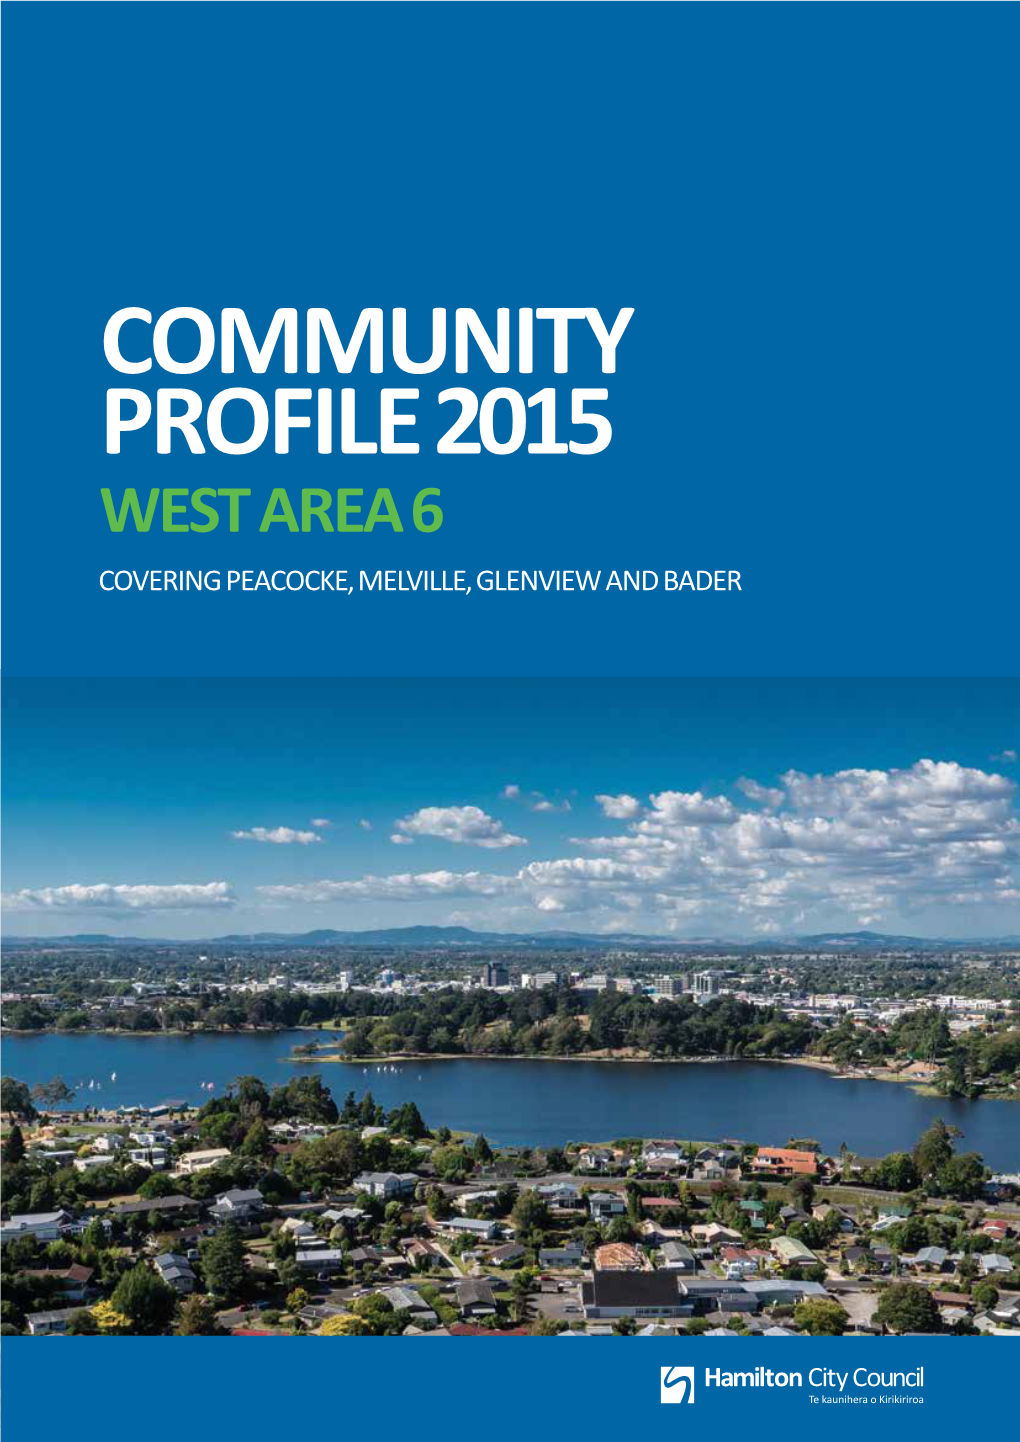 Community Profile 2015 West Area 6 Covering Peacocke, Melville, Glenview and Bader